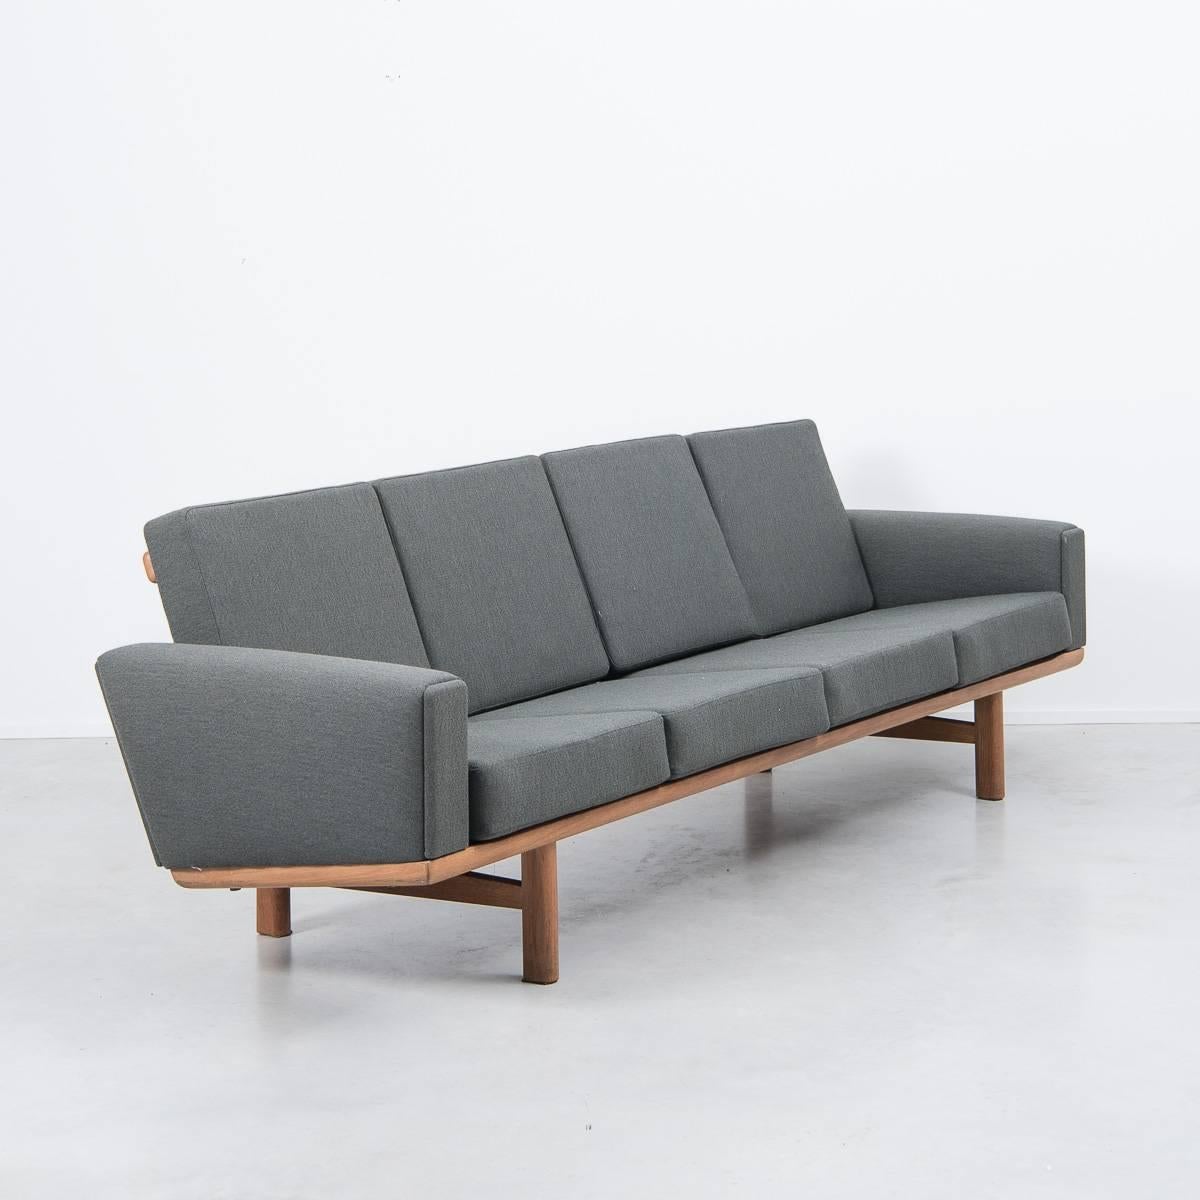 Four-seat solid teak sofa in dark grey-green De Ploeg Wool. Designed by the master craftsman of Danish modern seating, Hans J Wegner for GETAMA, Denmark in 1955. Newly reupholstered original sprung cushions with removable covers. Solid oak frame